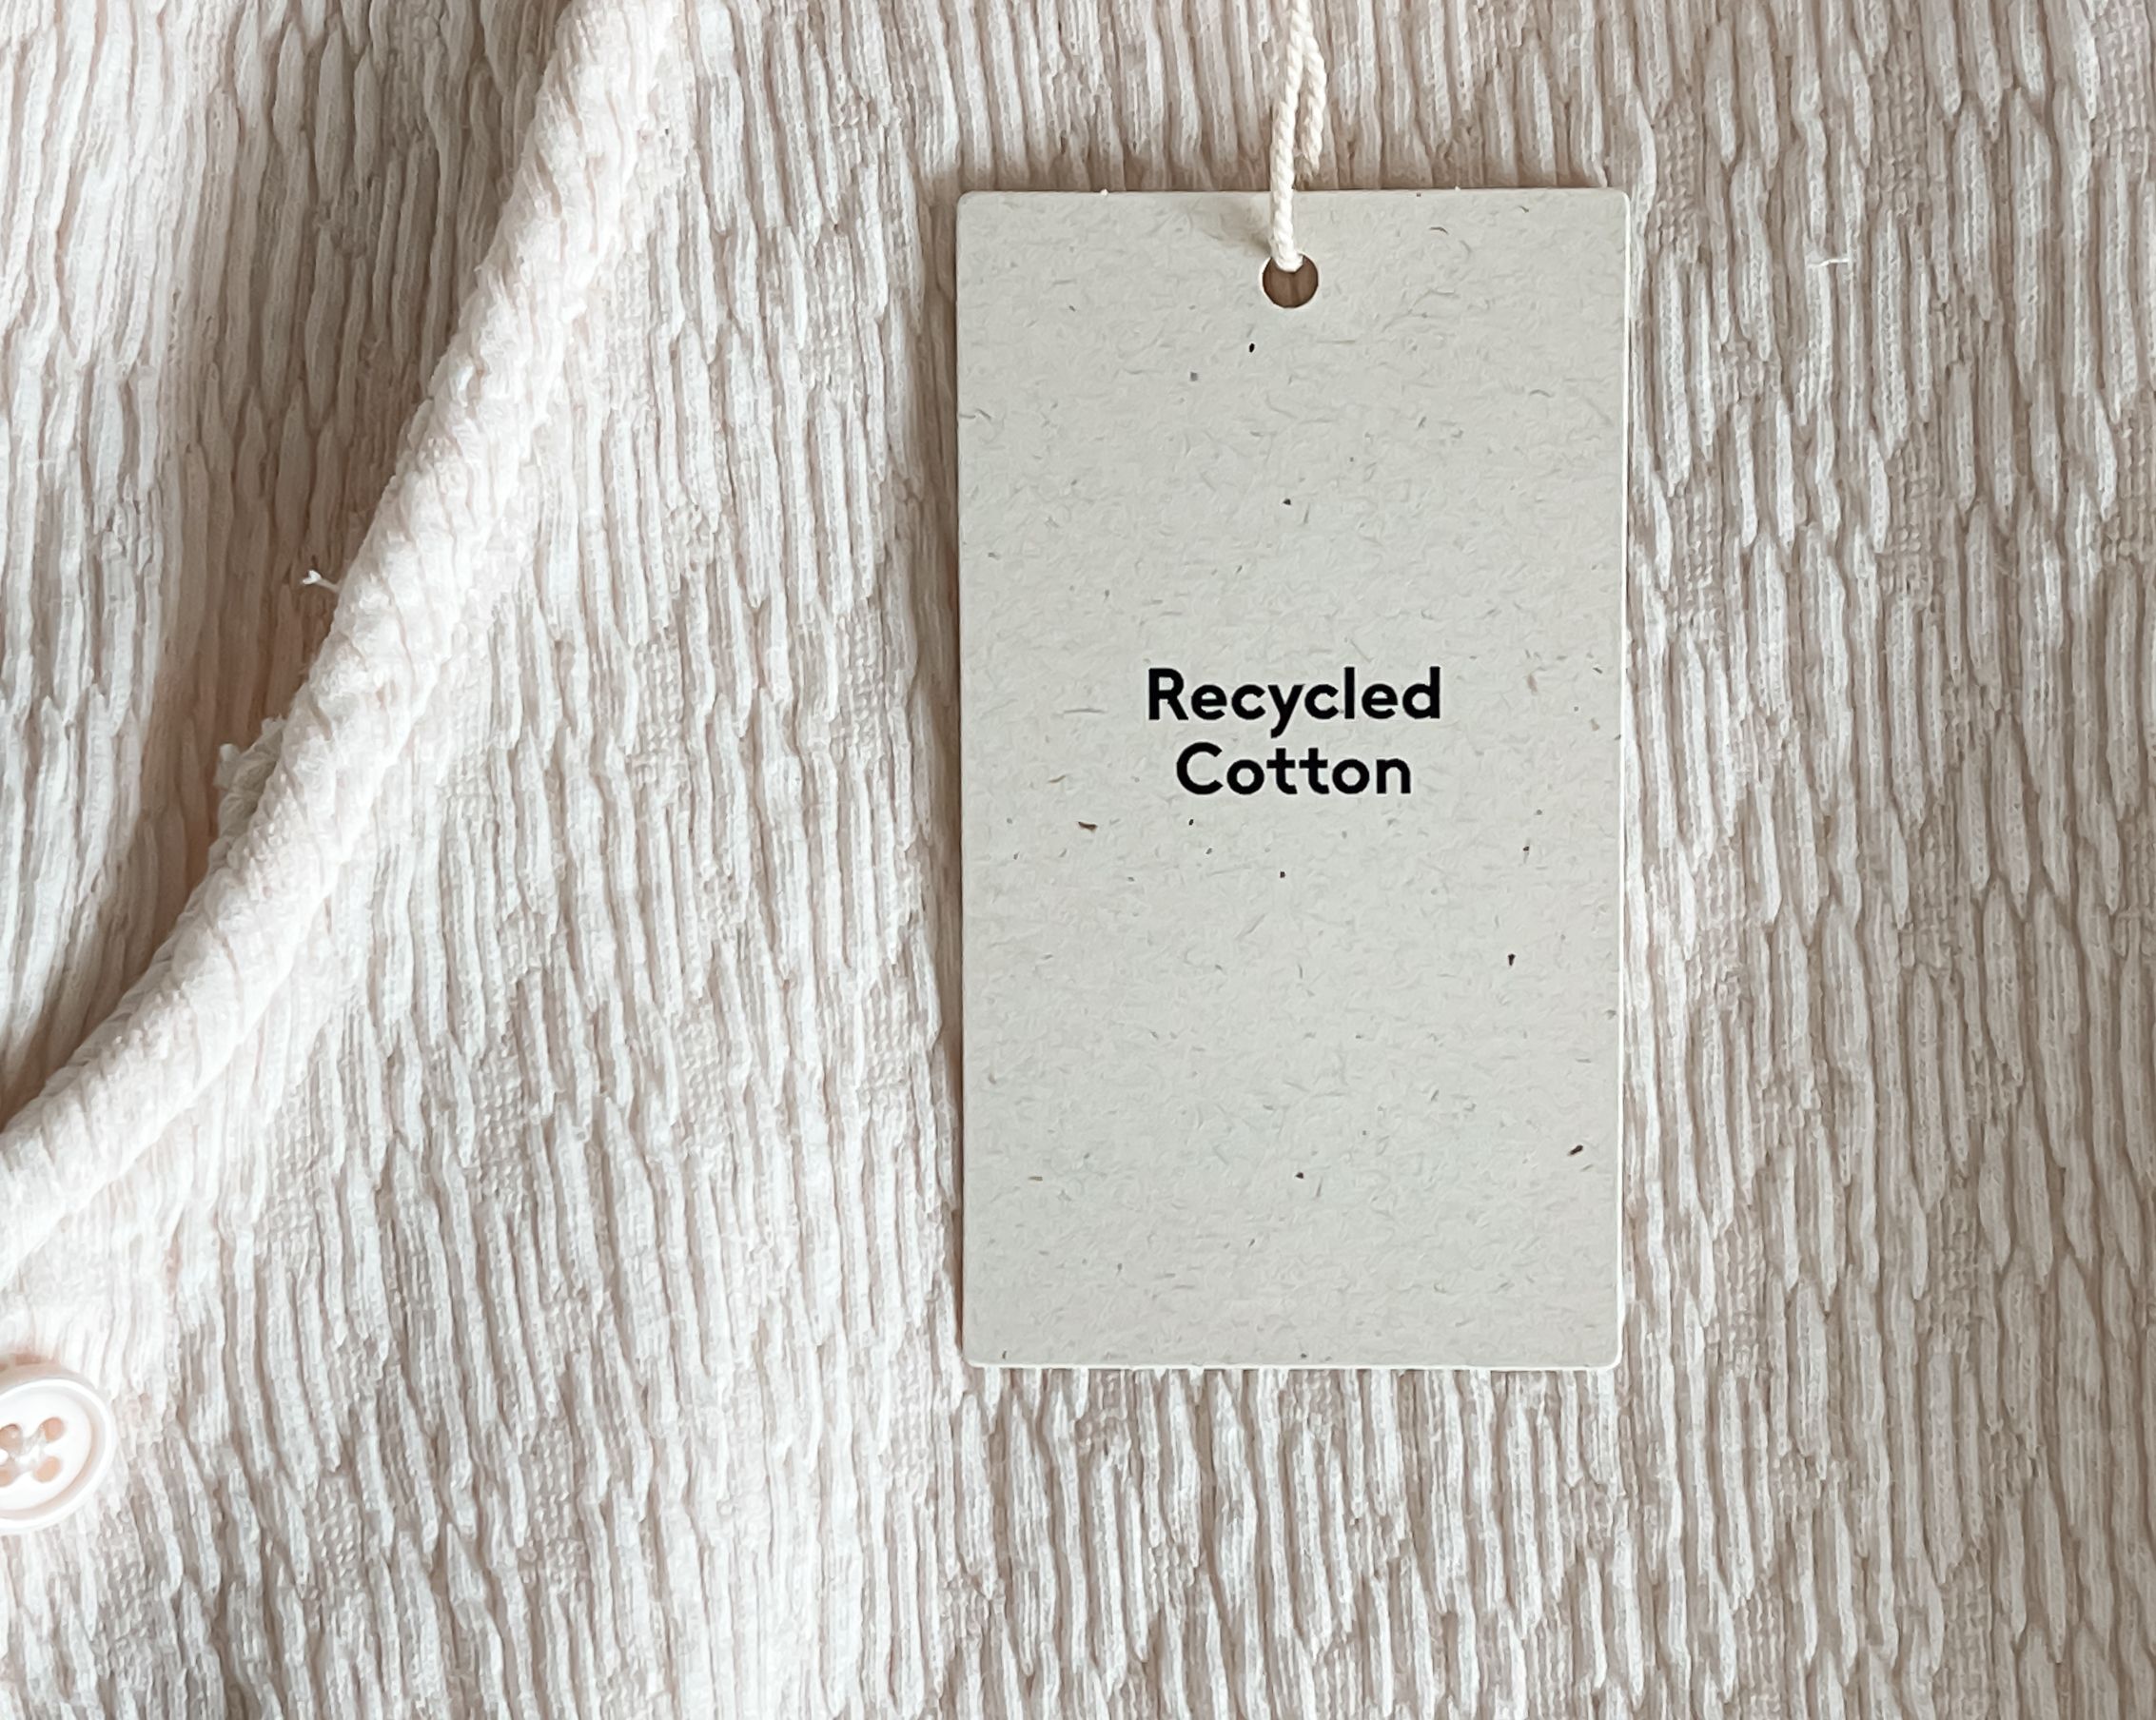 ‘Better’ Materials Aren’t Enough to Dent Fashion’s Climate Impact